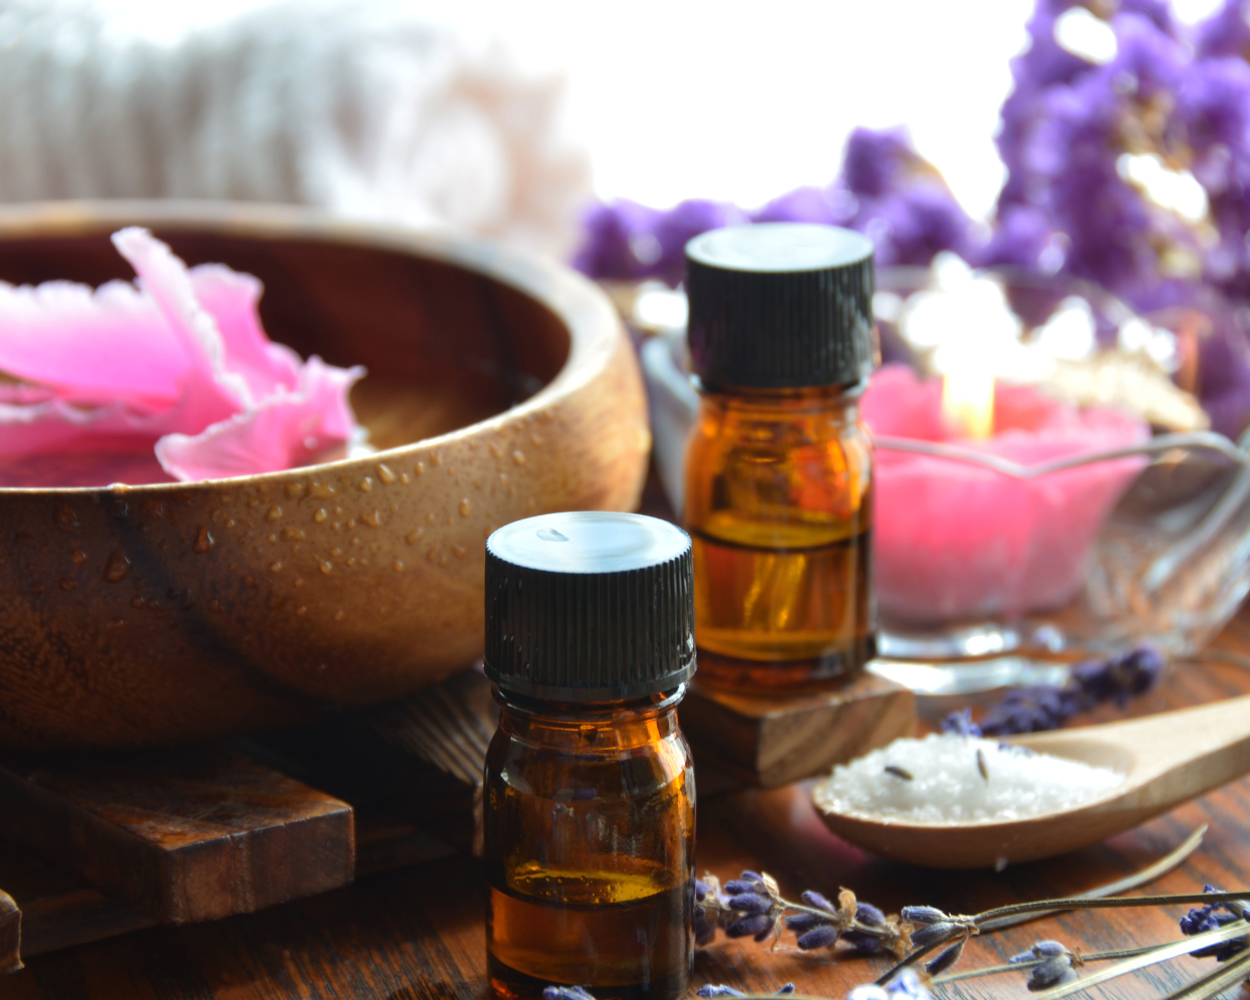 Aromatherapy setup with essential oil bottles, a bowl of flower petals, lavender, and bath salts on a wooden surface.